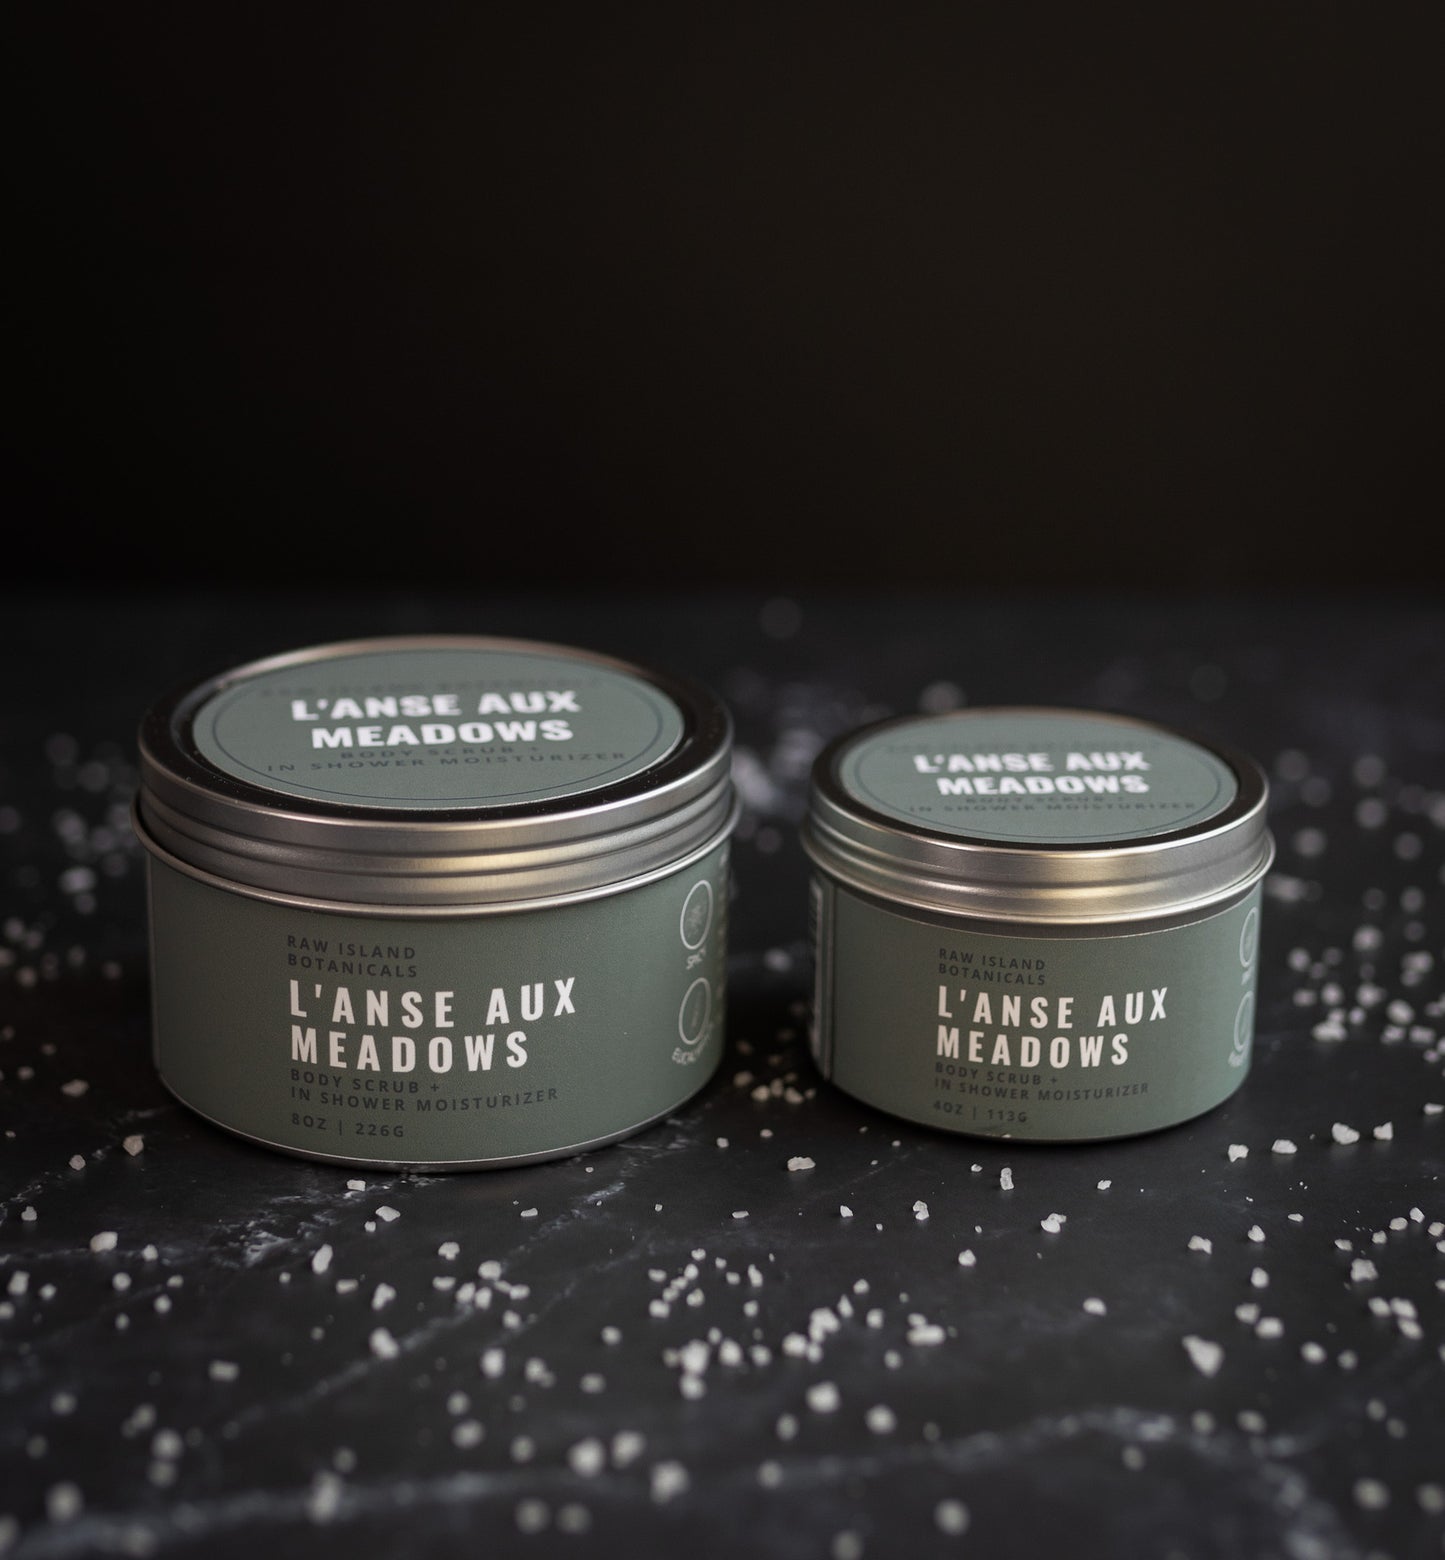 L’anse aux Meadows Body Scrub and In-Shower Moisturizer